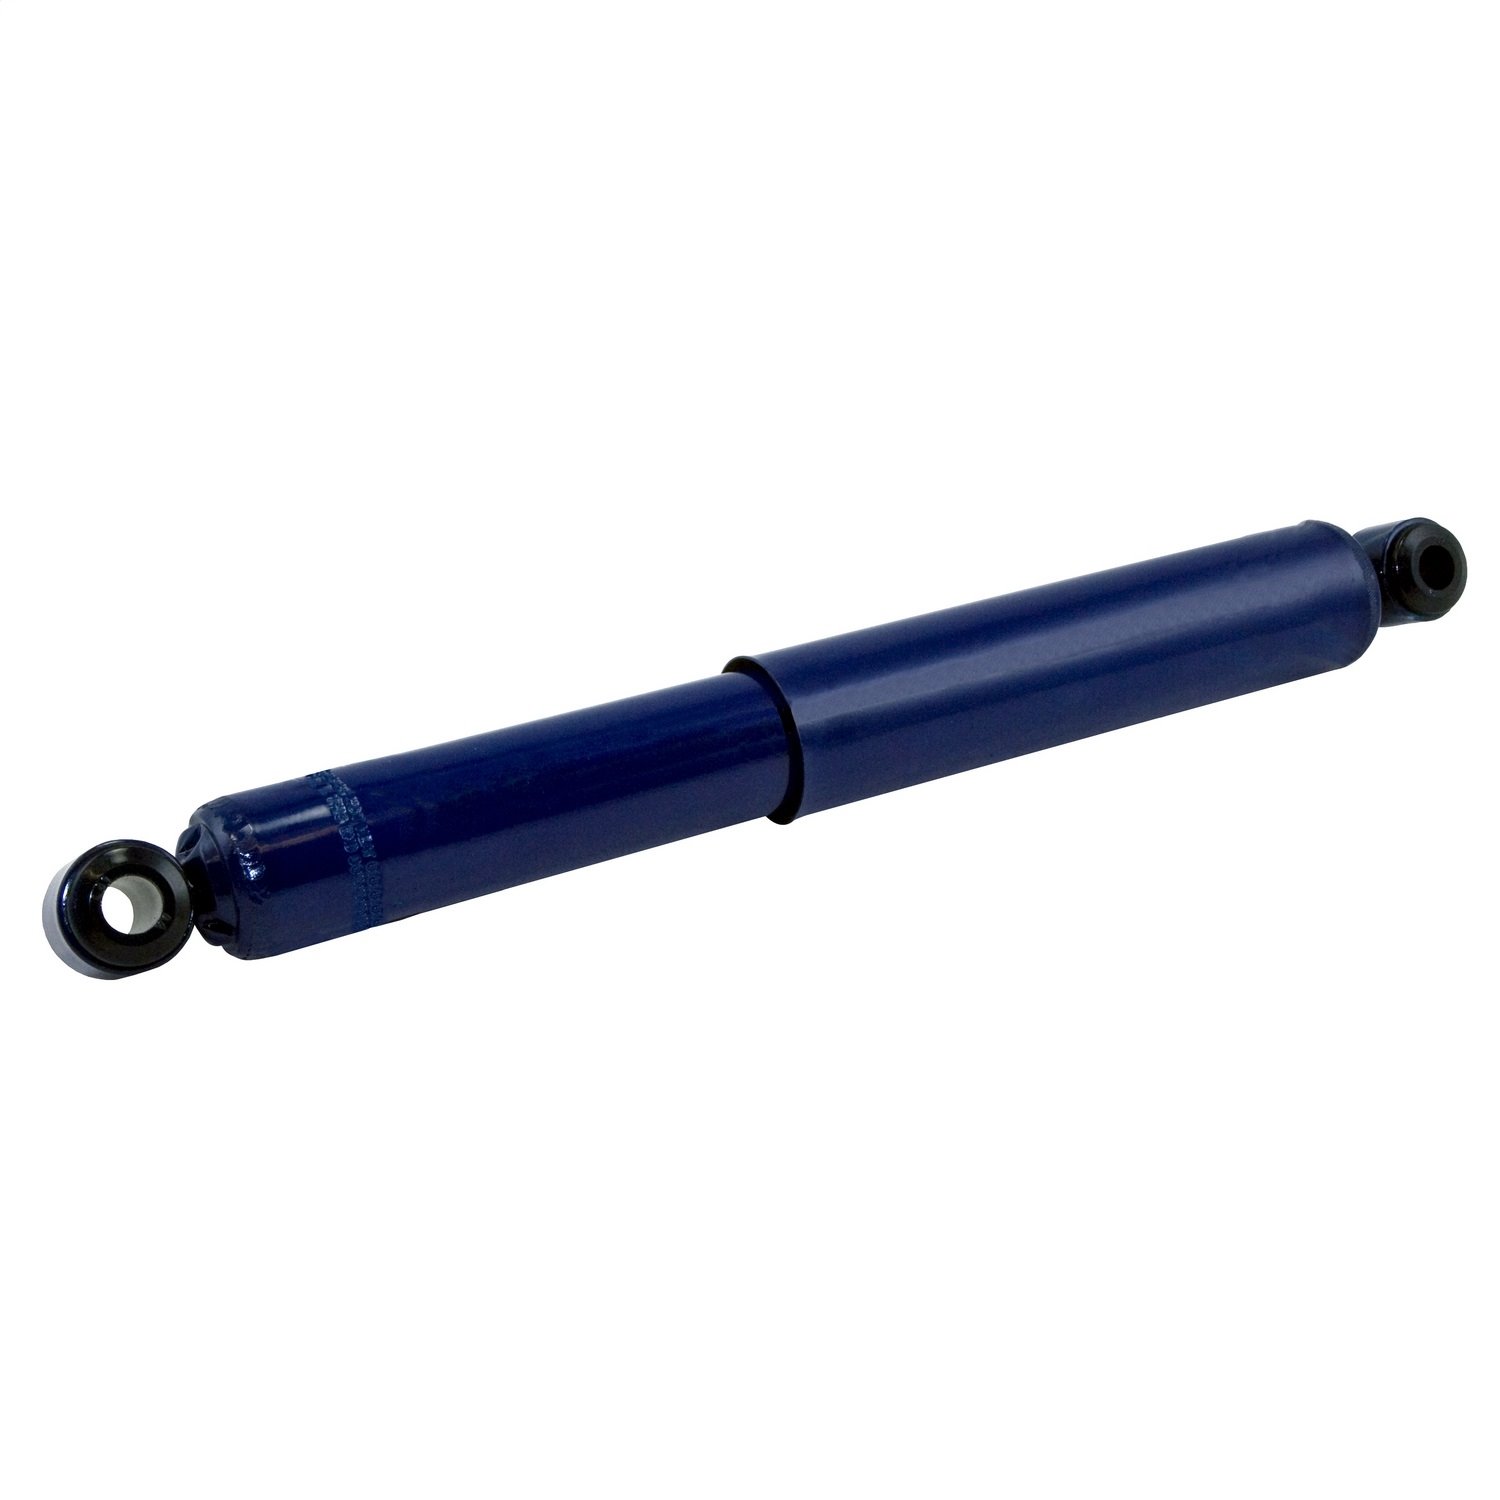 Heavy-duty replacement rear shock absorber from Omix-ADA, Fits 54-62 Willys station wagons and